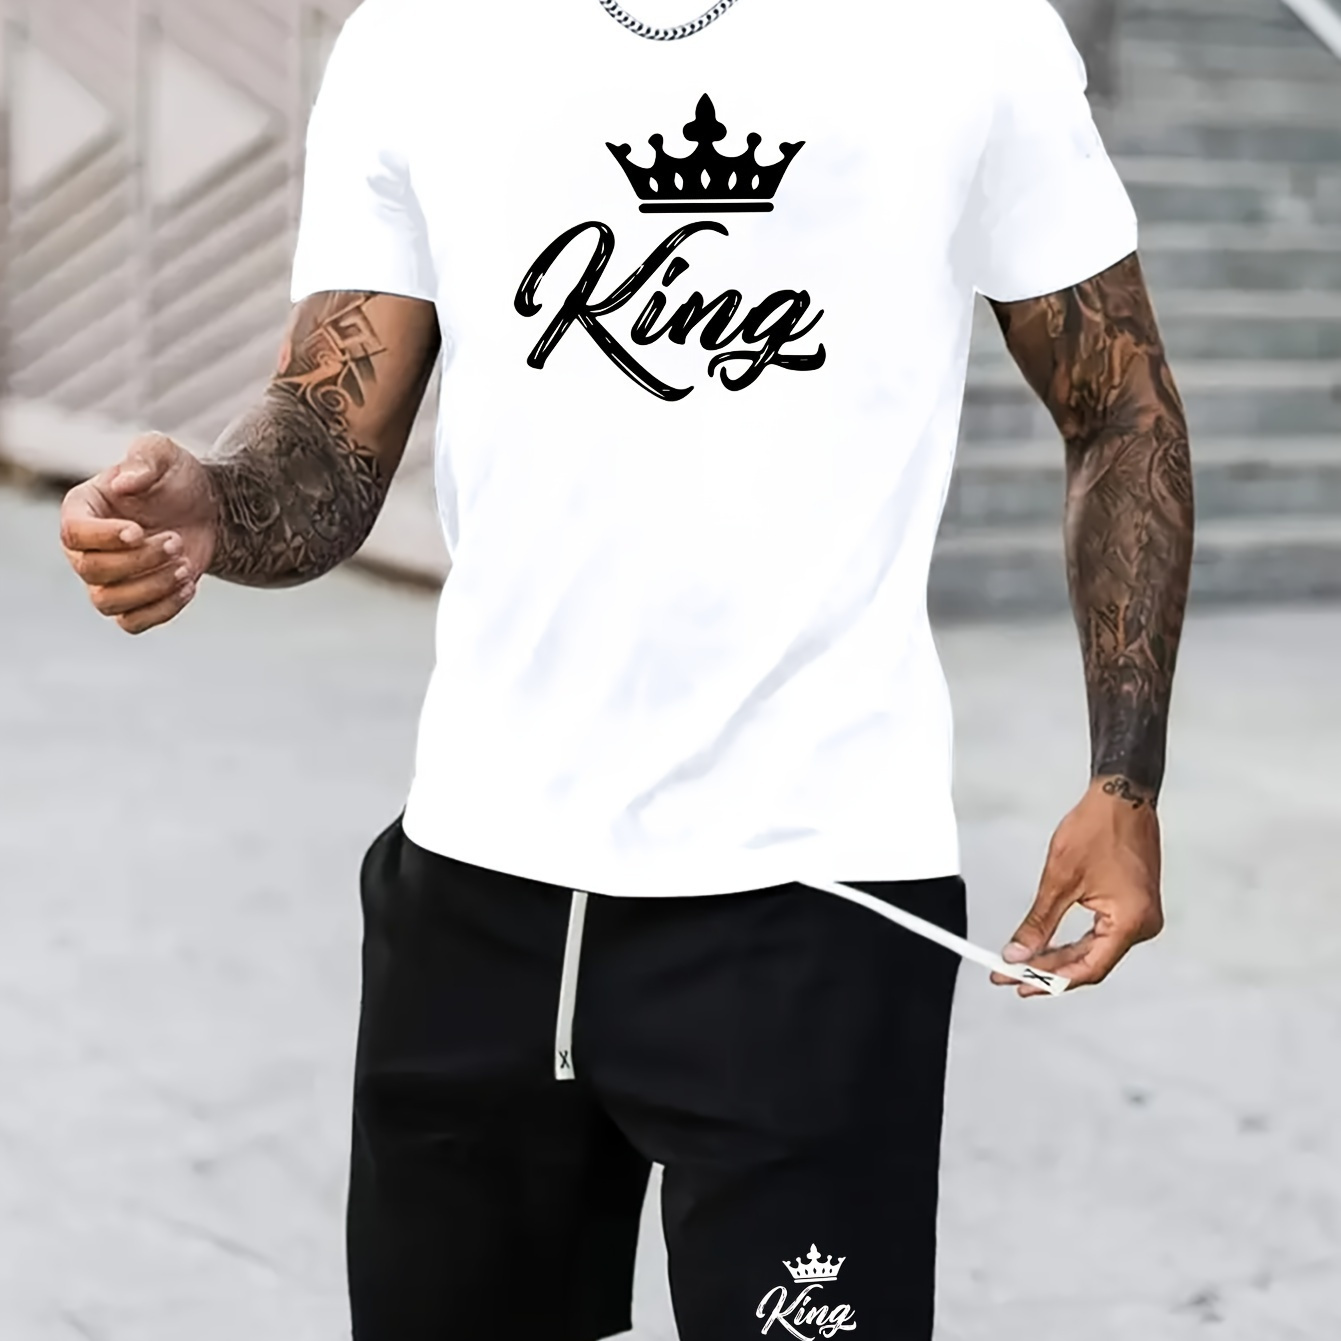 

King And Crown Print Men's Short Sleeve T-shirt & Drawstring Shorts 2pcs Casual Sports Regular Top Pants Suit Outfits For Spring Summer